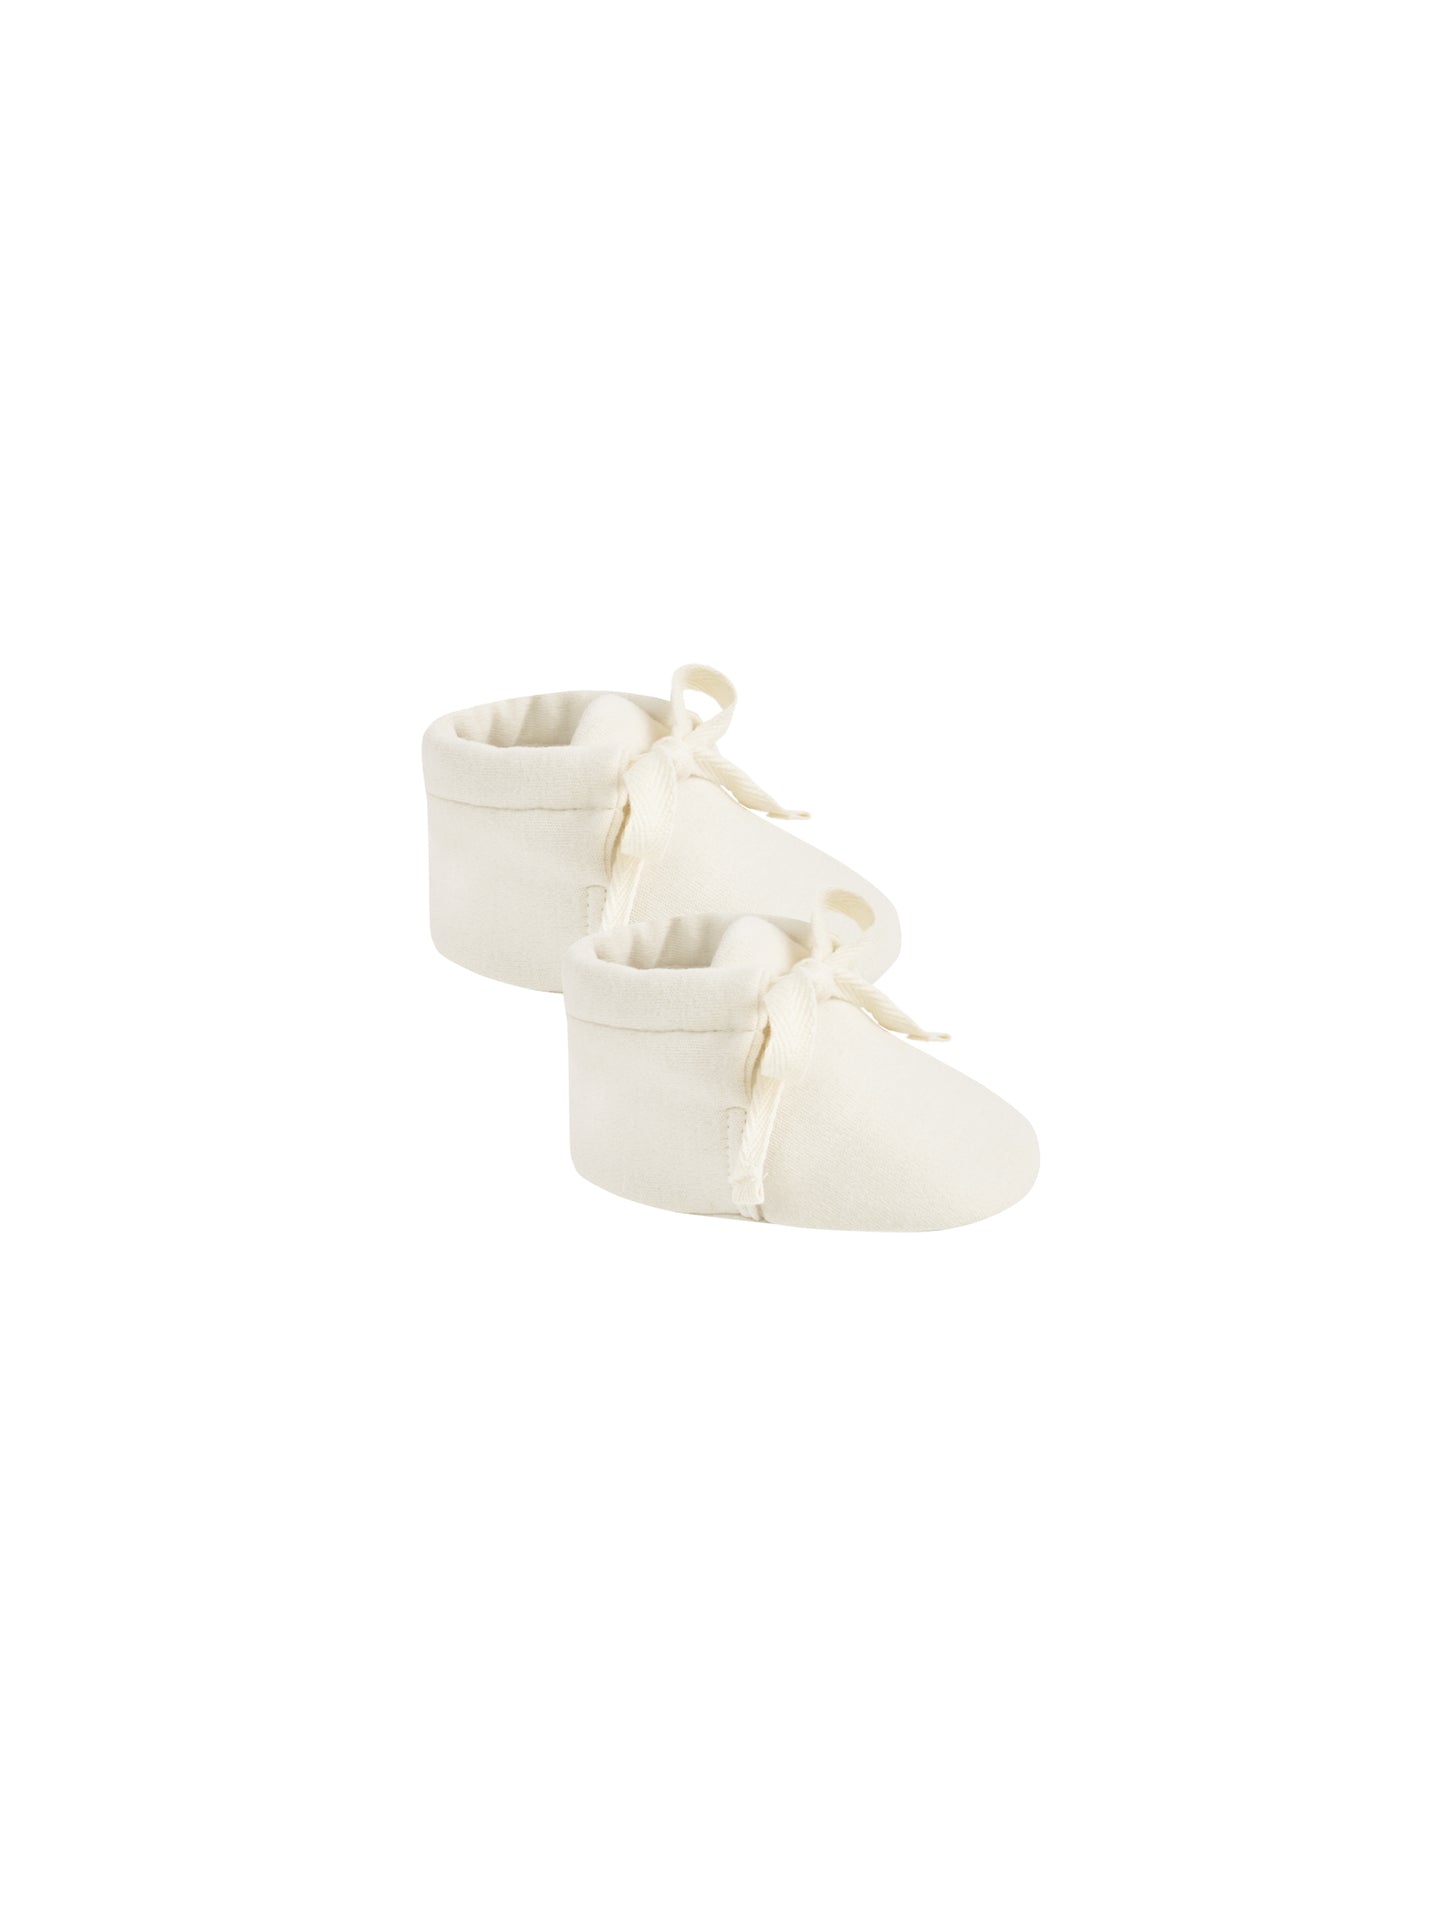 Quincy Mae Baby Booties Ivory